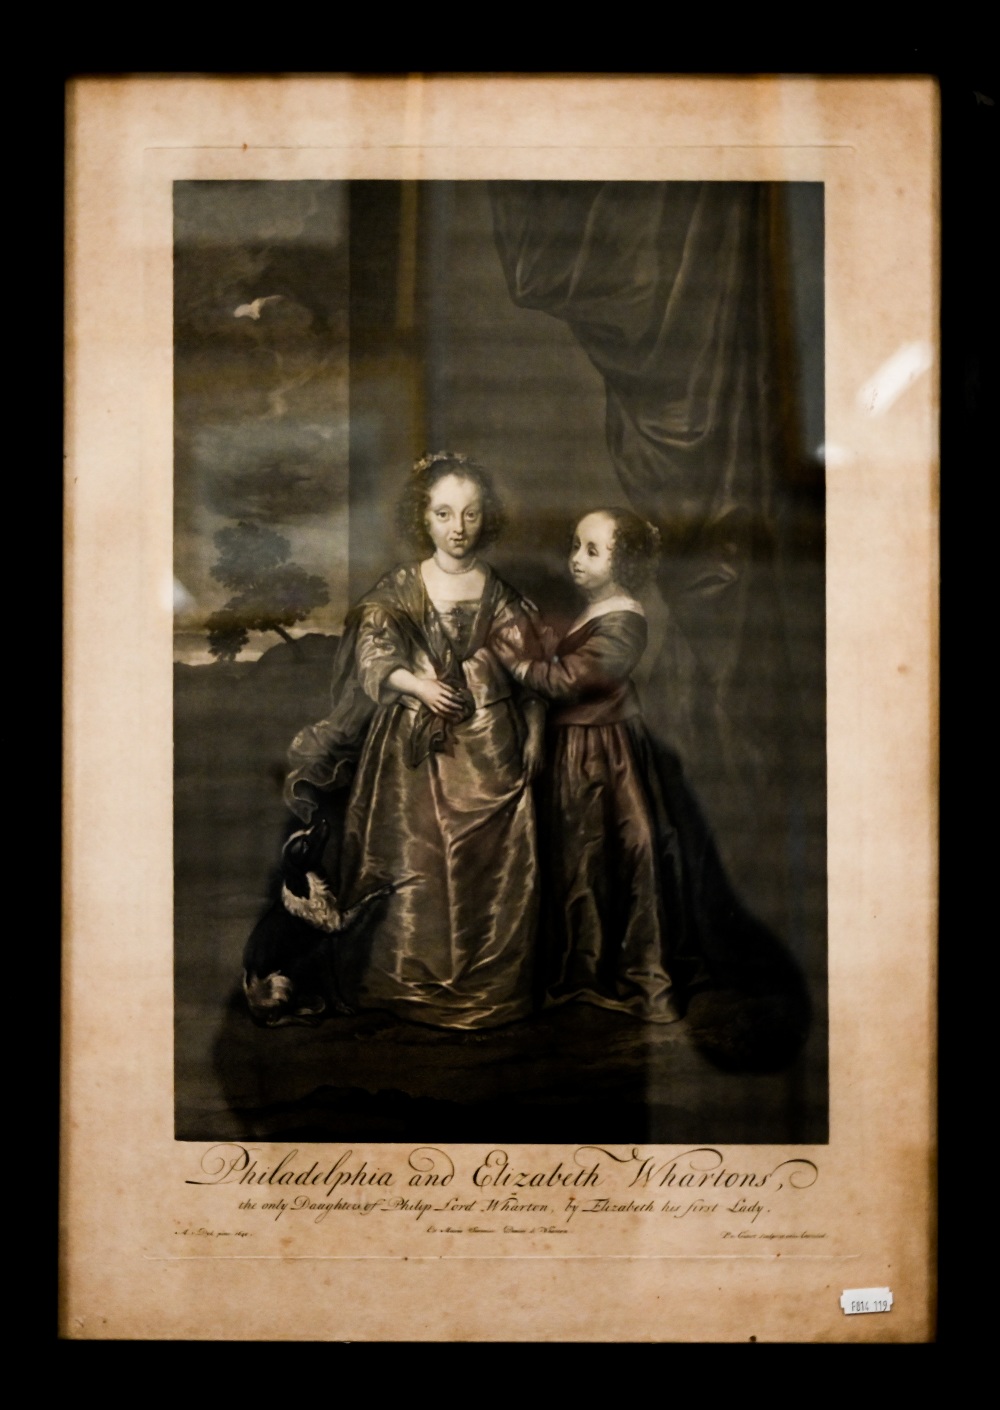 Two 18th century engravings - 'Philadelphia and Elizabeth Whartons', after van Dyck, by Gunst, 52 - Image 2 of 7